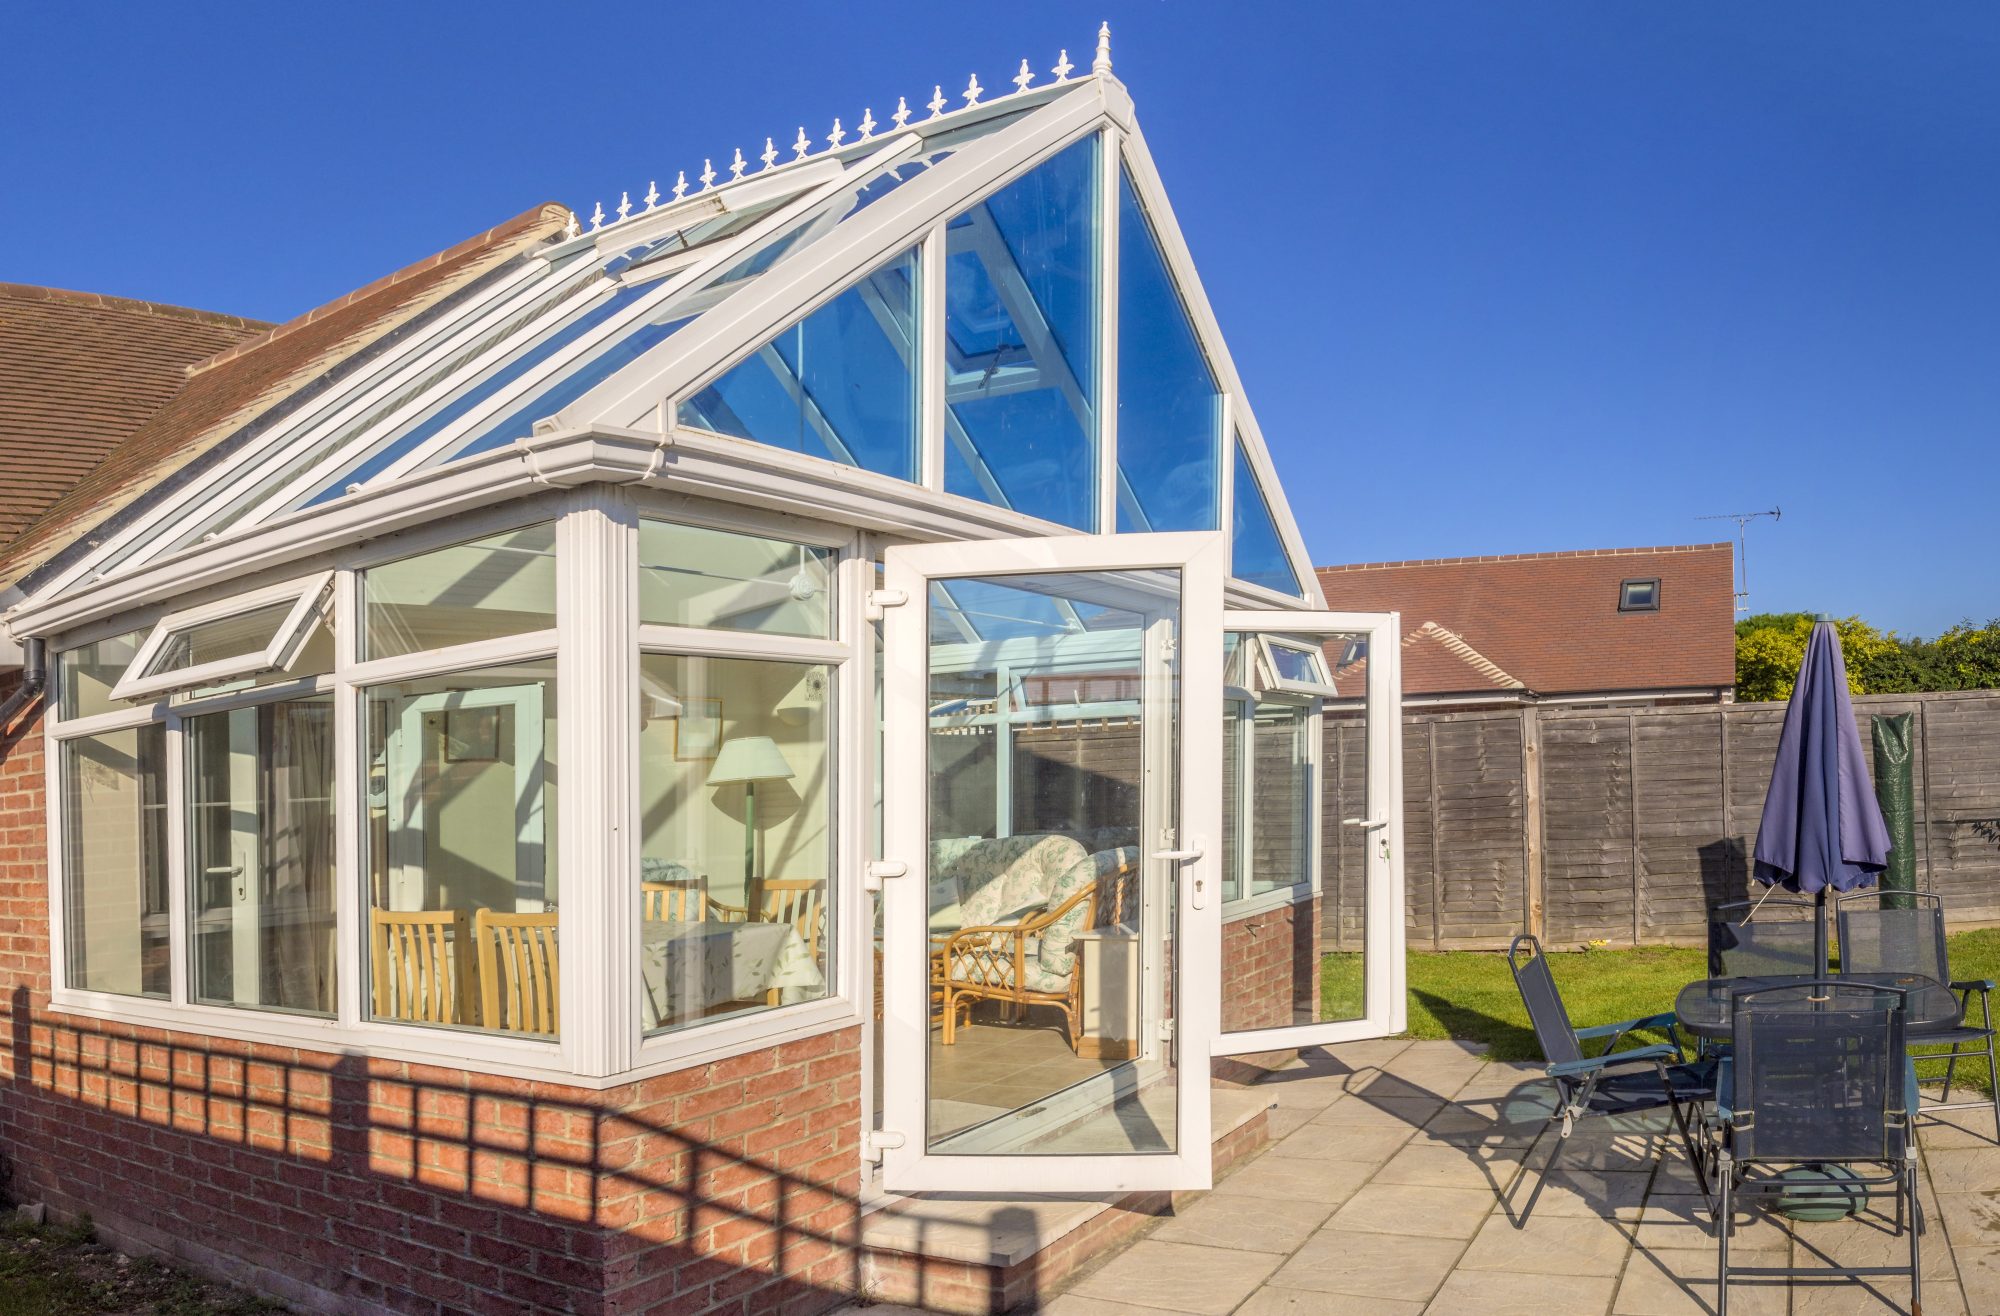 An image of a conservatory on a sunny day looking clean